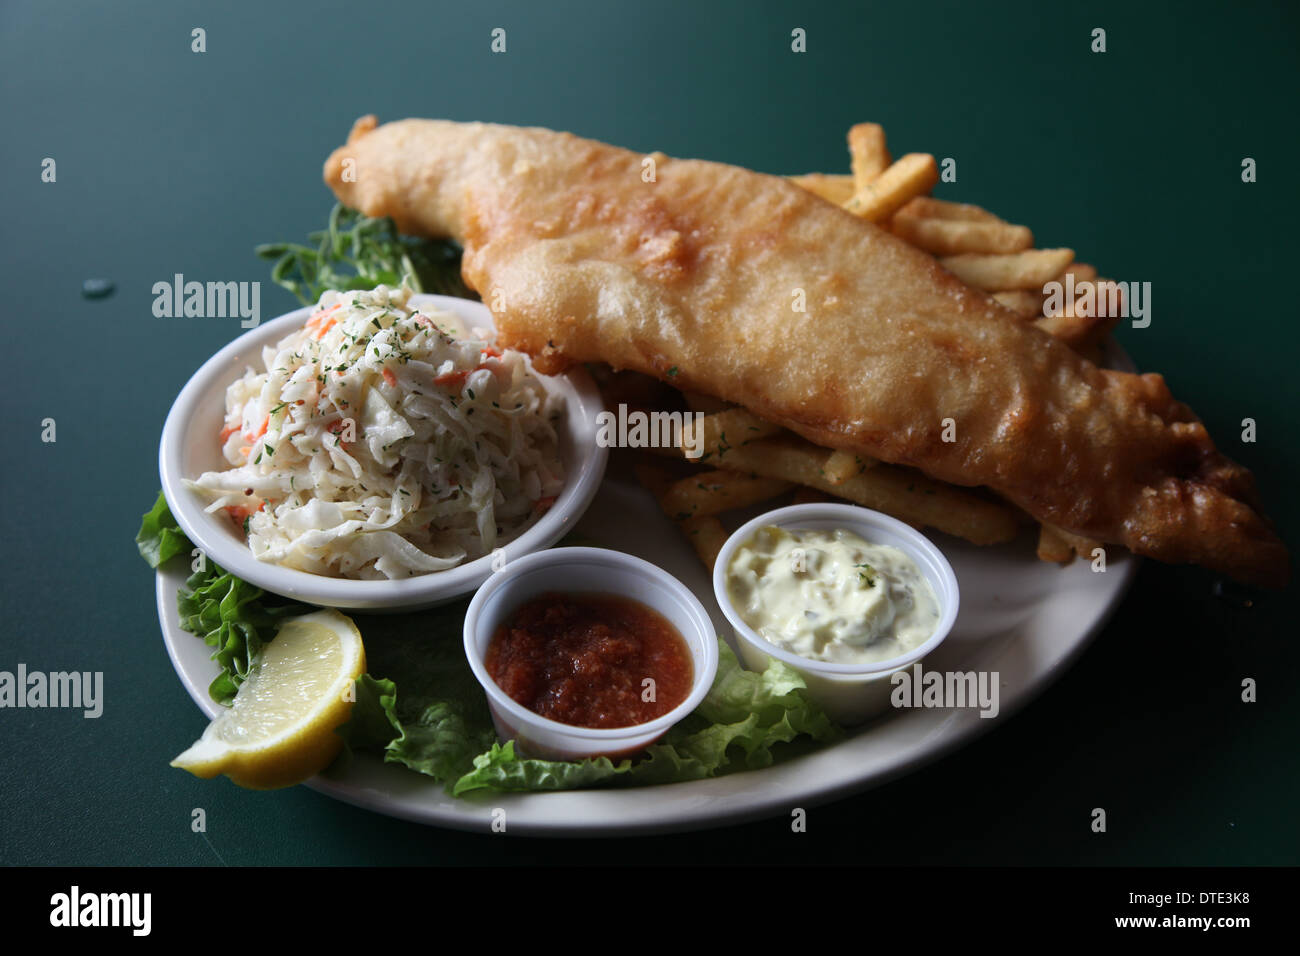 Fish & Chips with a pint of stout beer Stock Photo